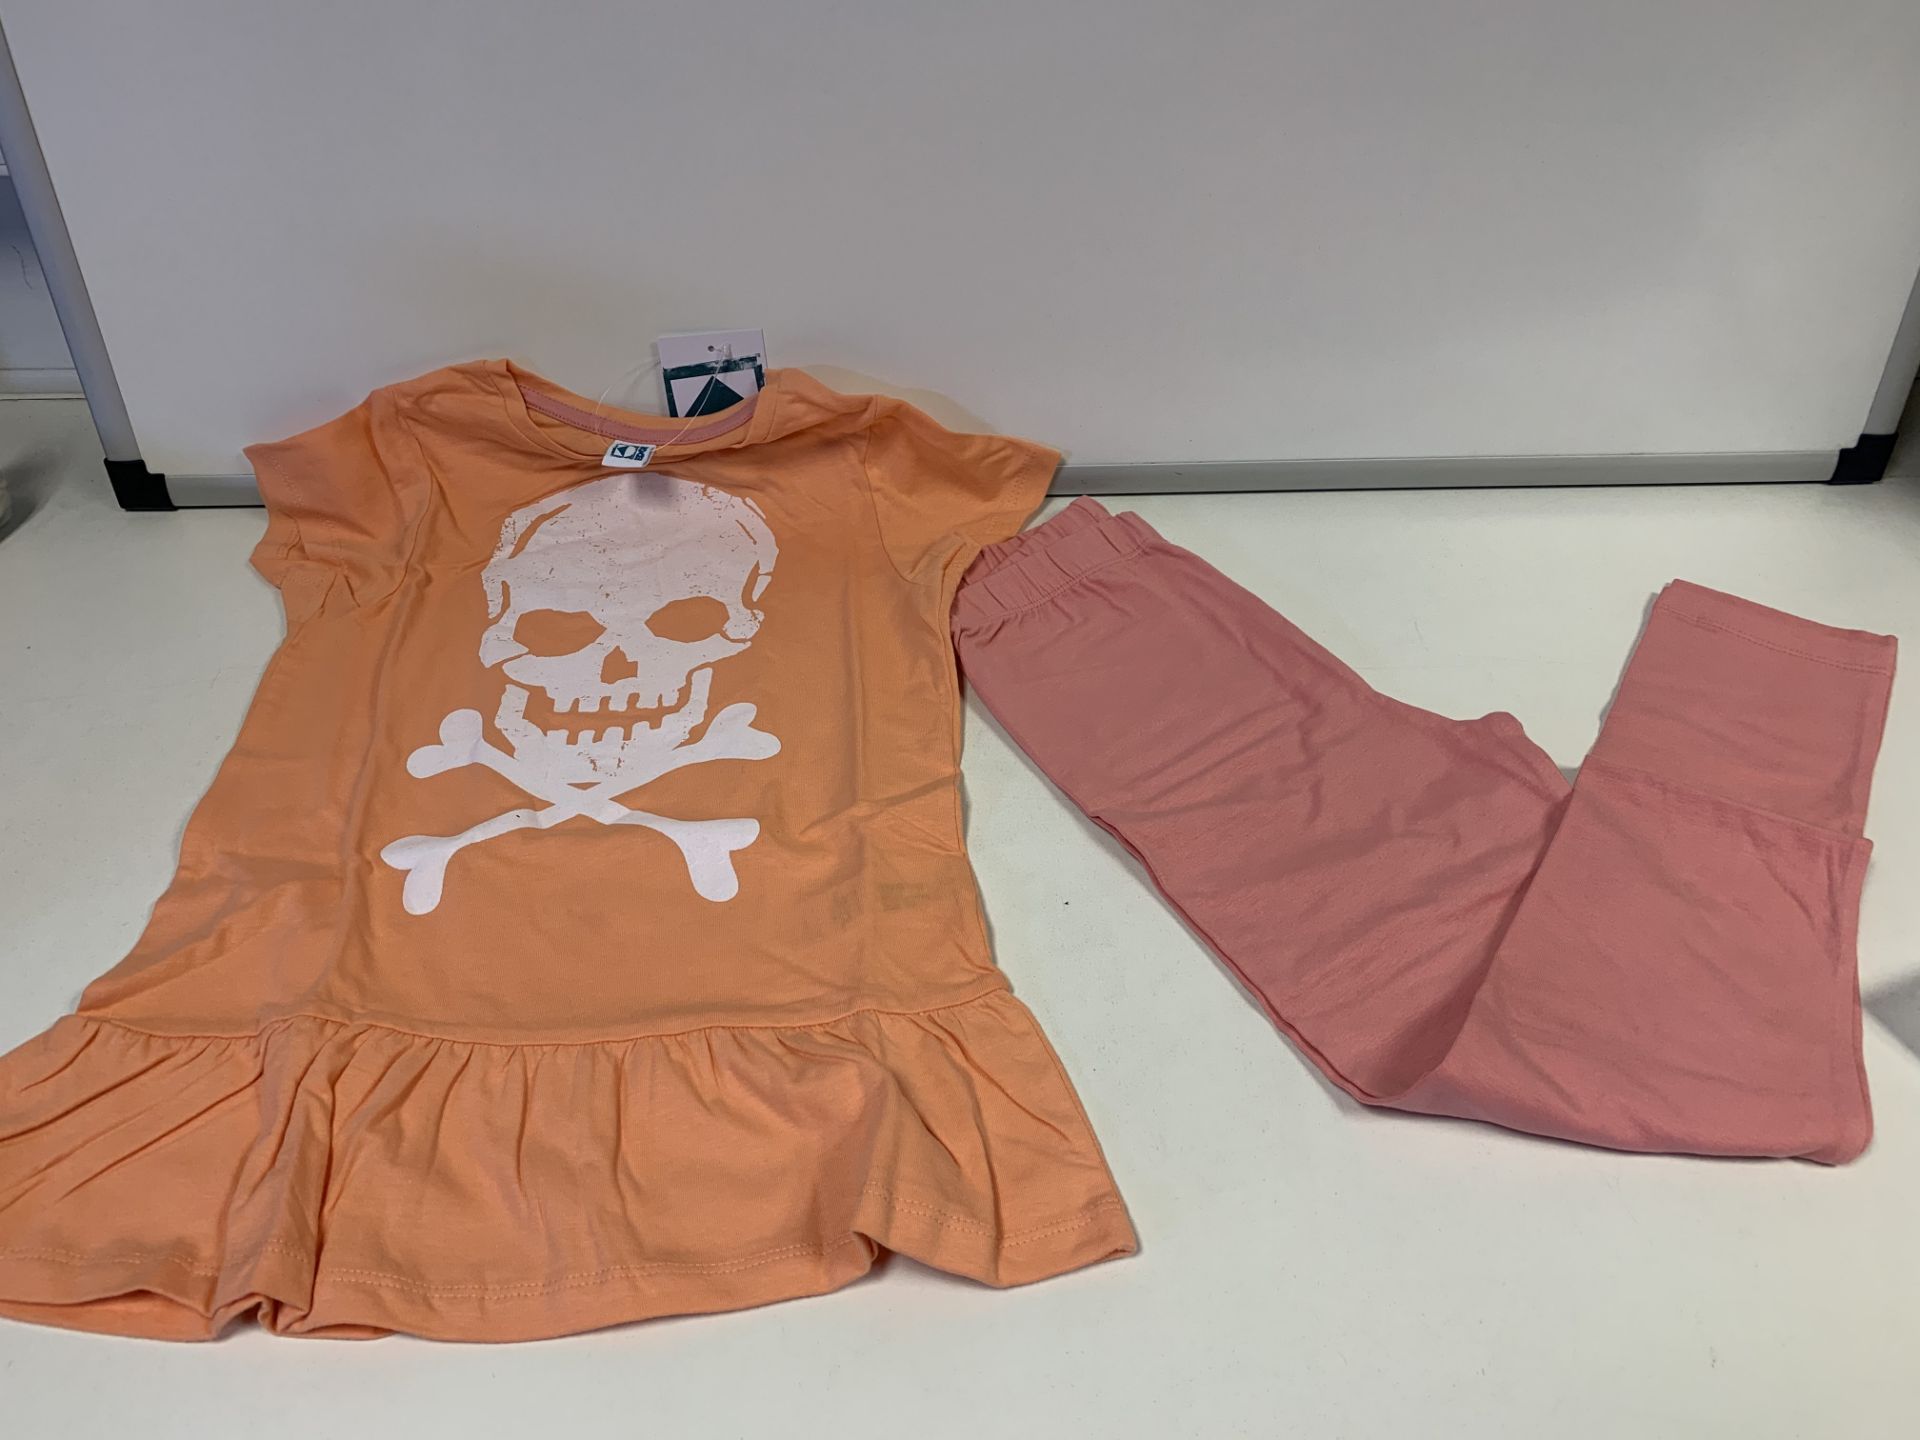 (NO VAT) 15 X BRAND NEW EDGE CHILDRENS CORAL AND PINK TOP AND LEGGINGS SETS SIZE 7-8 (46/2)